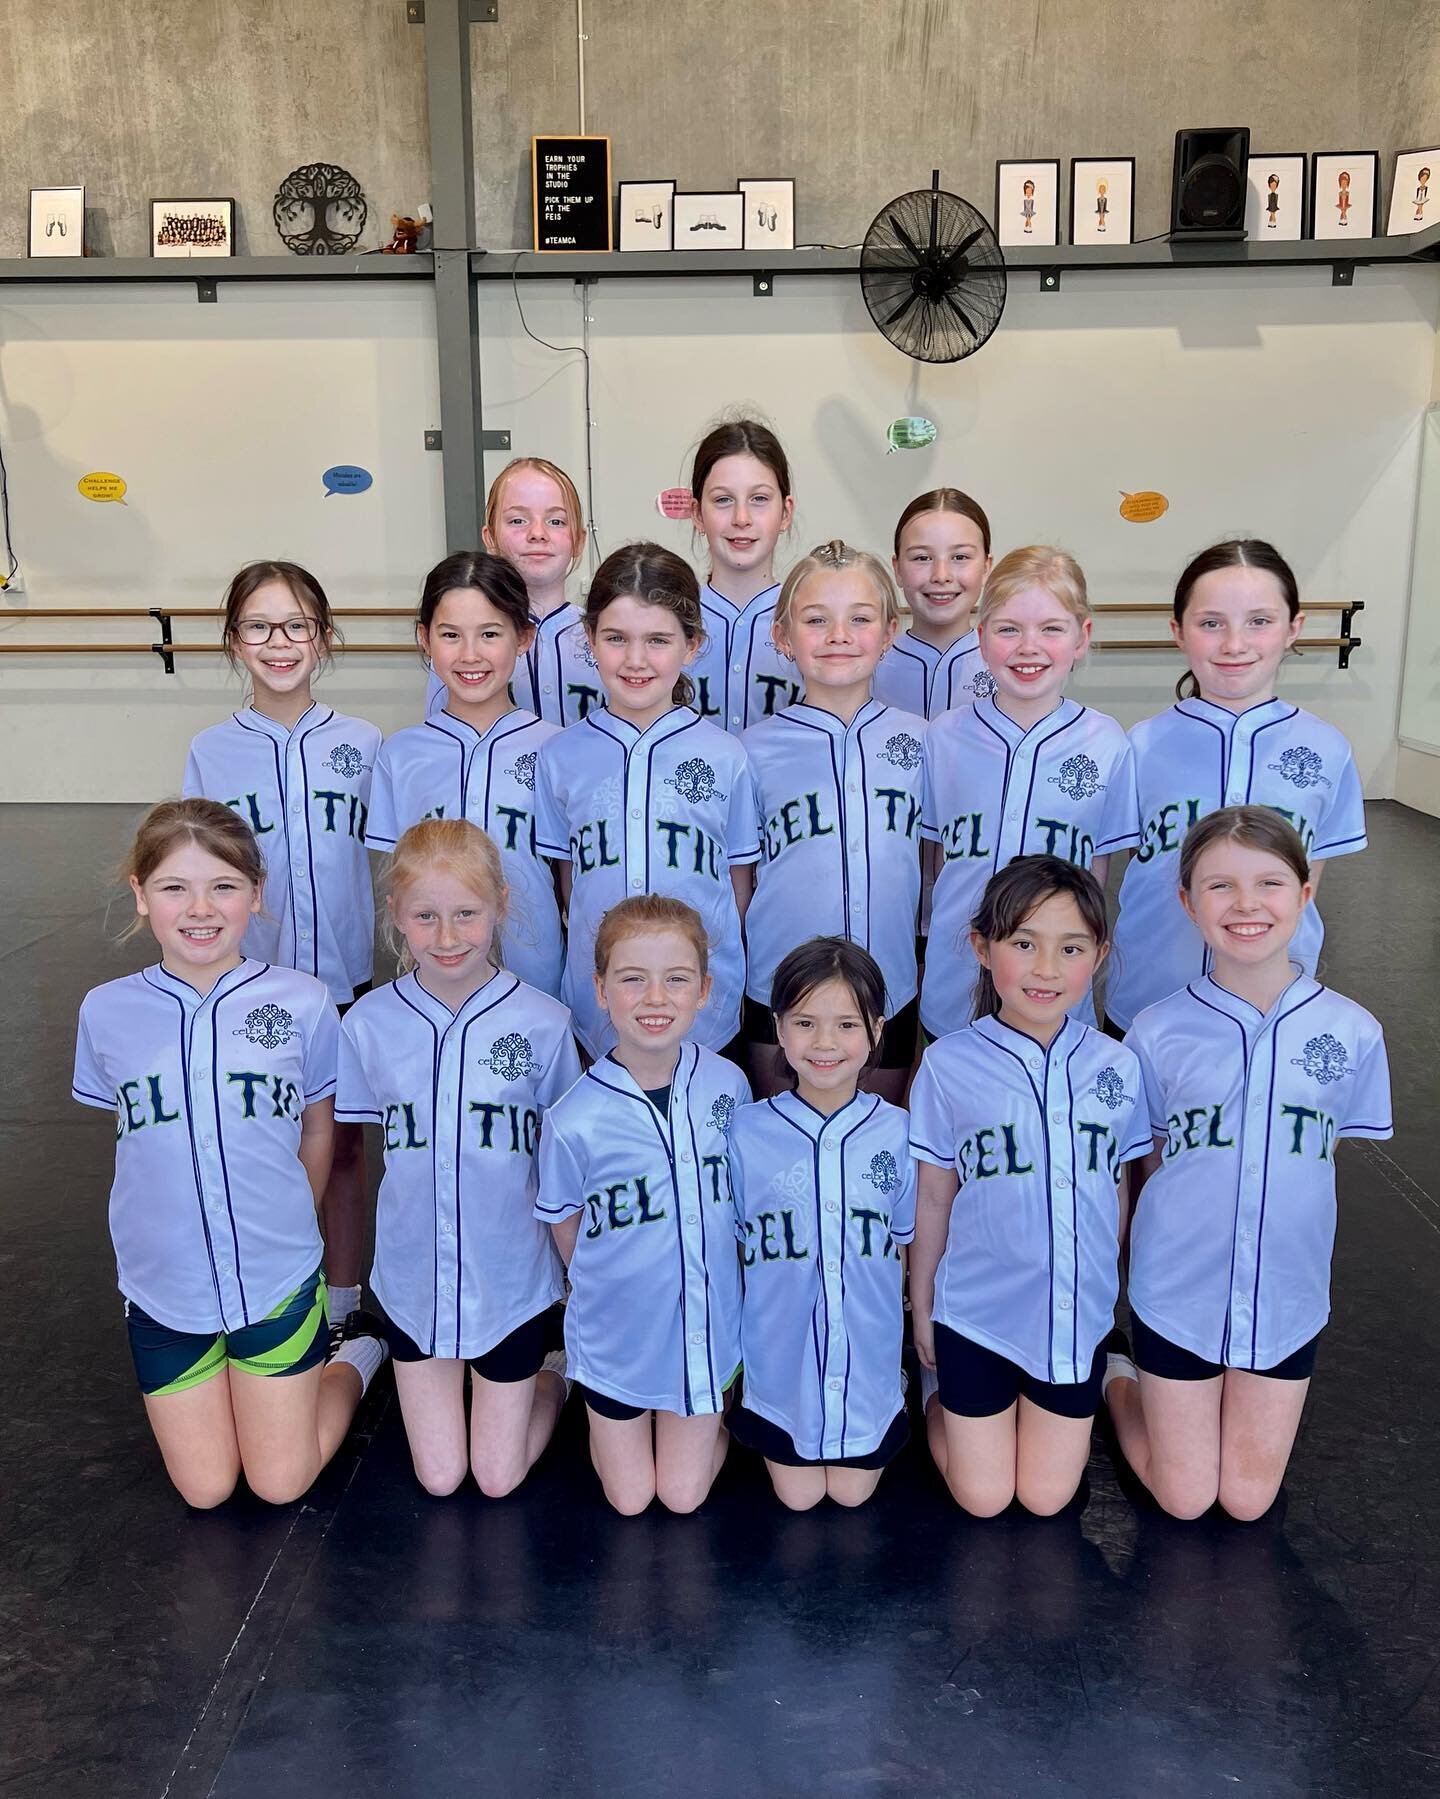 ✨ 2022 STATE CHAMPIONSHIP CEILI TEAM ✨ 

Good luck to our 20 hard-working dancers who are competing this weekend in the WA Ceili State Championships! 🏆

#teamCA #WAIDC #ceilidancing